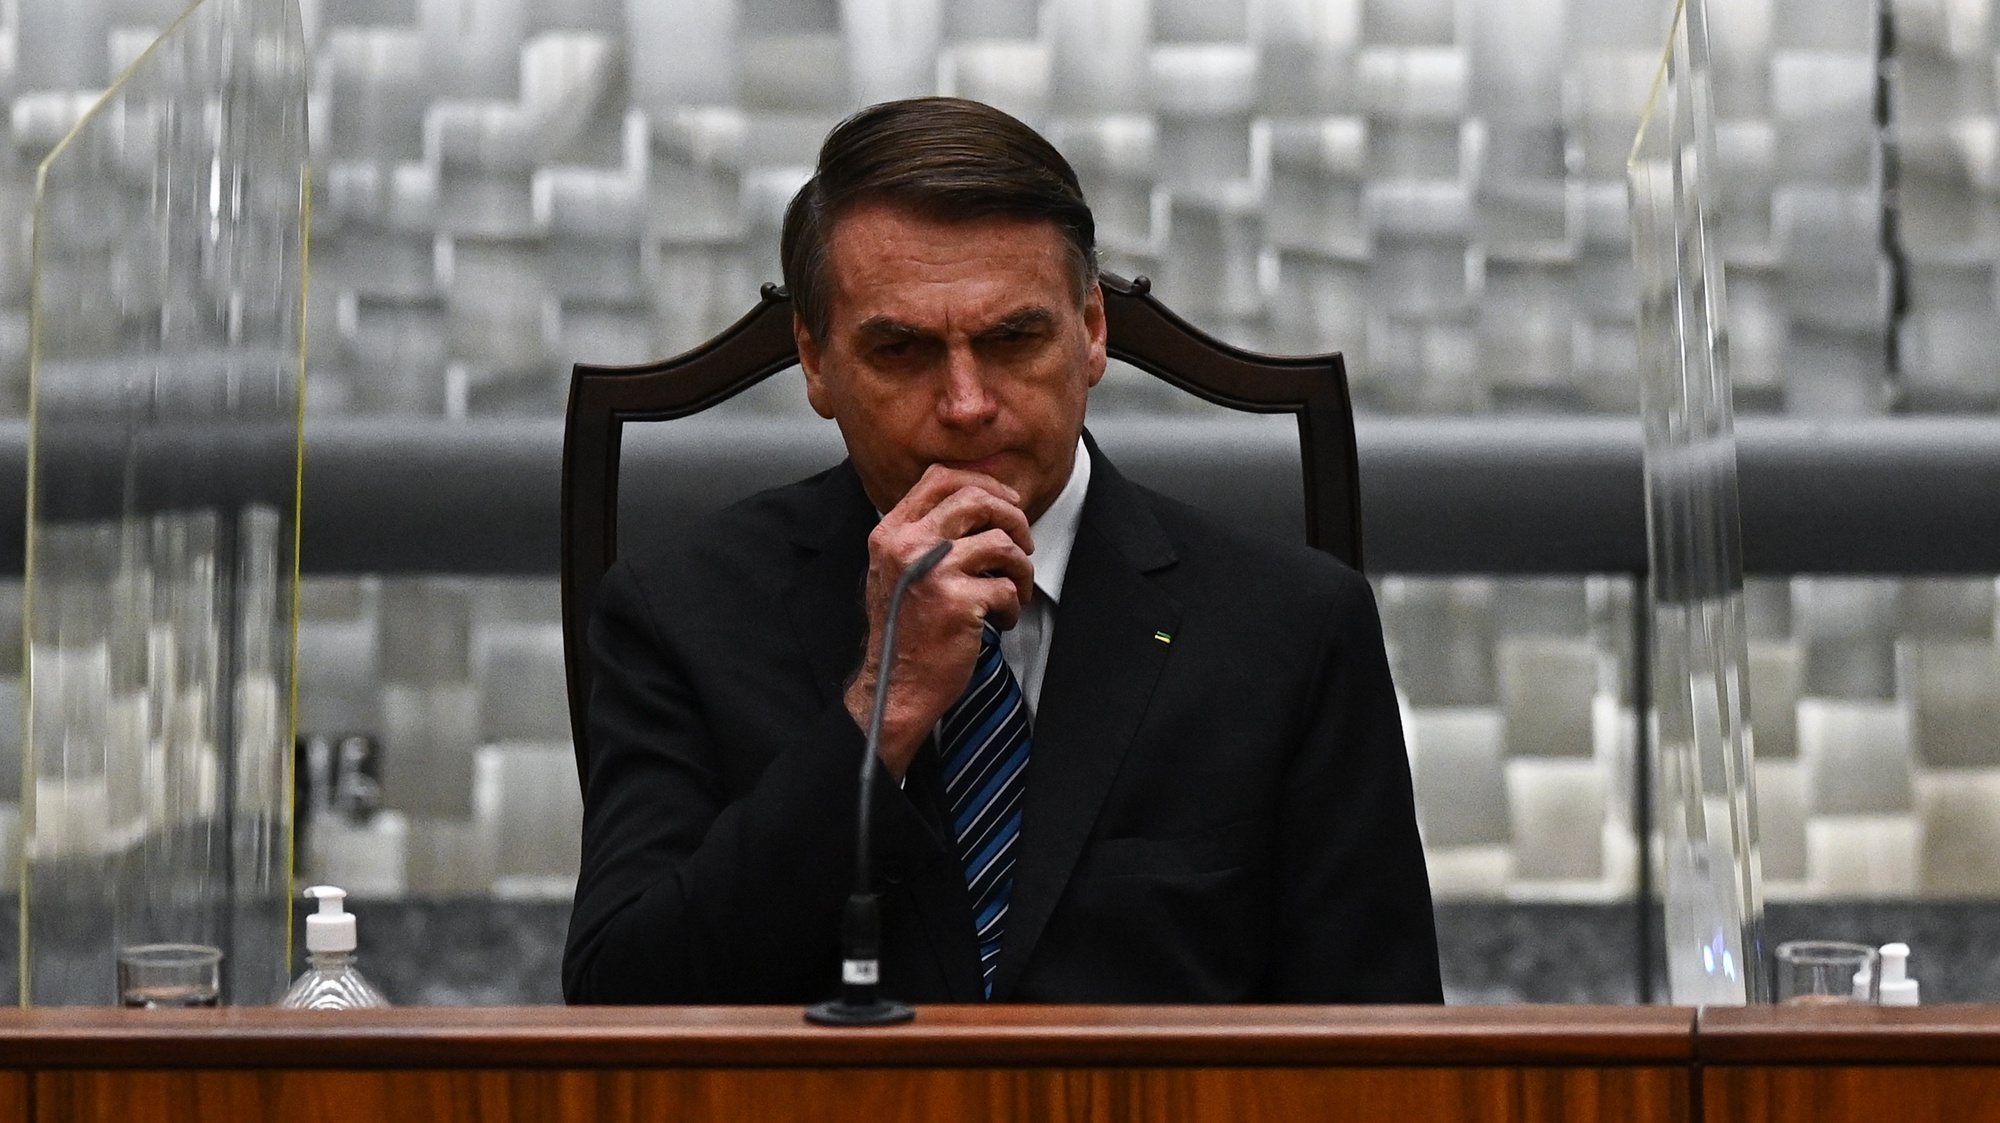 epa10353065 The President of Brazil, Jair Bolsonaro, attends the inauguration ceremony of Messod Azulay and Paulo Sergio Domingues as new judges of the Superior Court of Justice (STJ), in Brasilia, Brazil, 06 December 2022.  EPA/Andre Borges